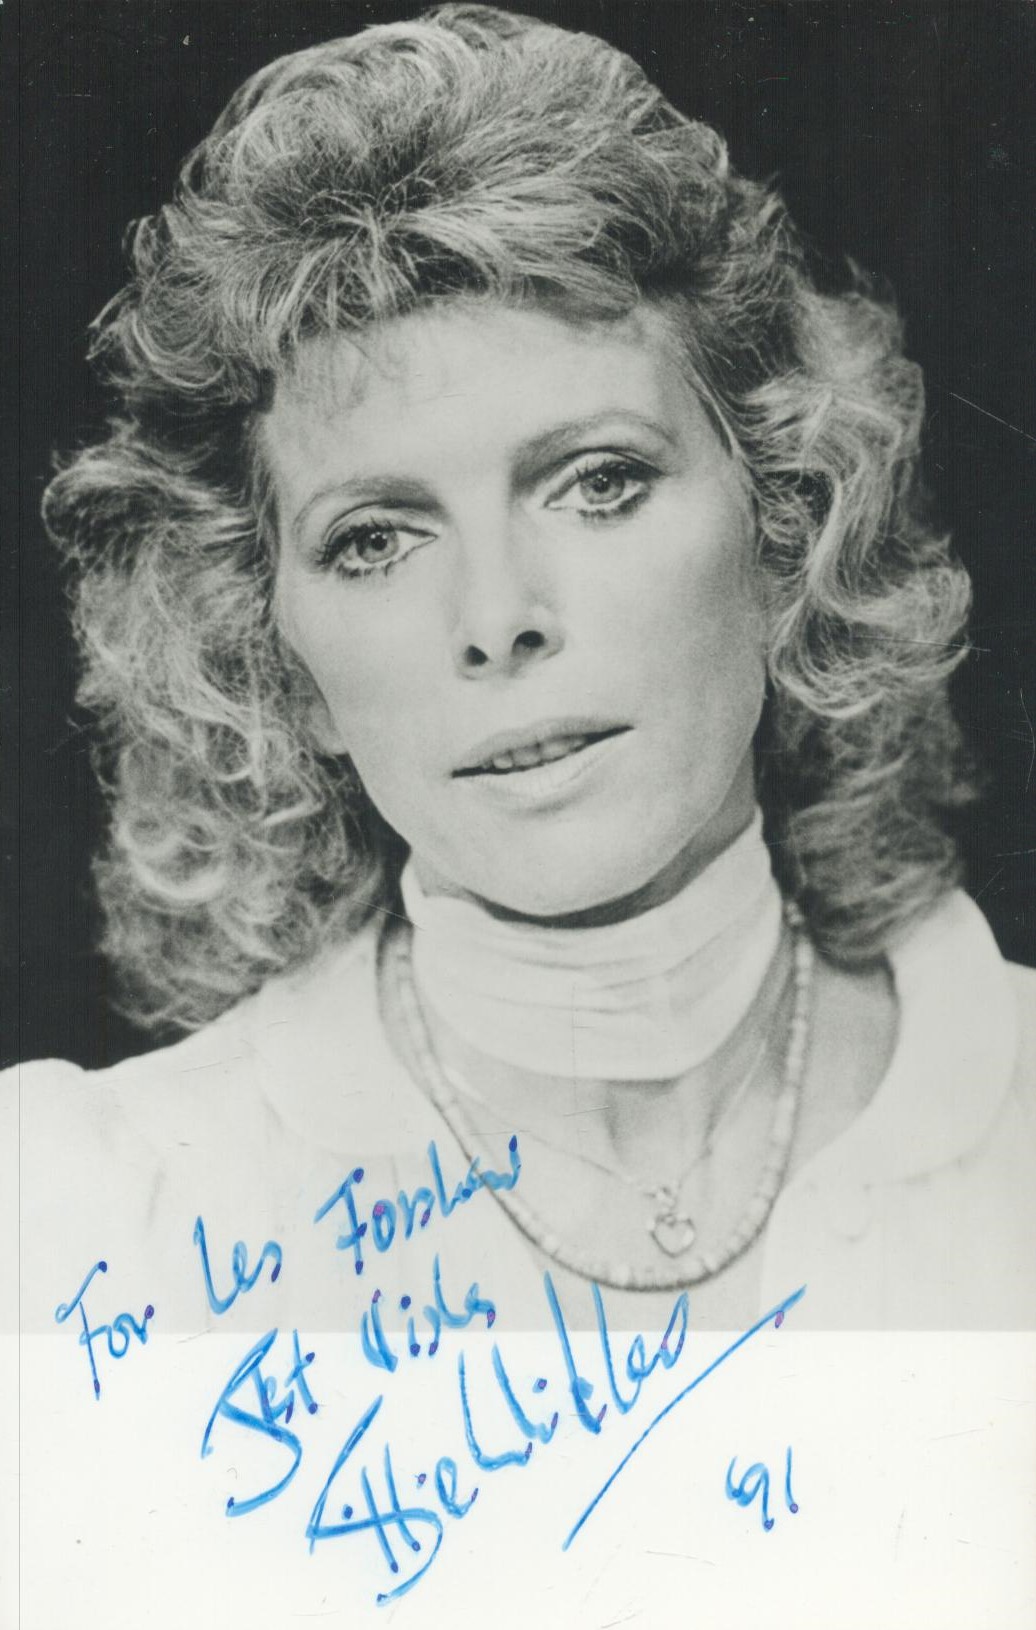 Billie Whitelaw signed 6x4 black and white photo. Dedicated. Good condition. All autographs are